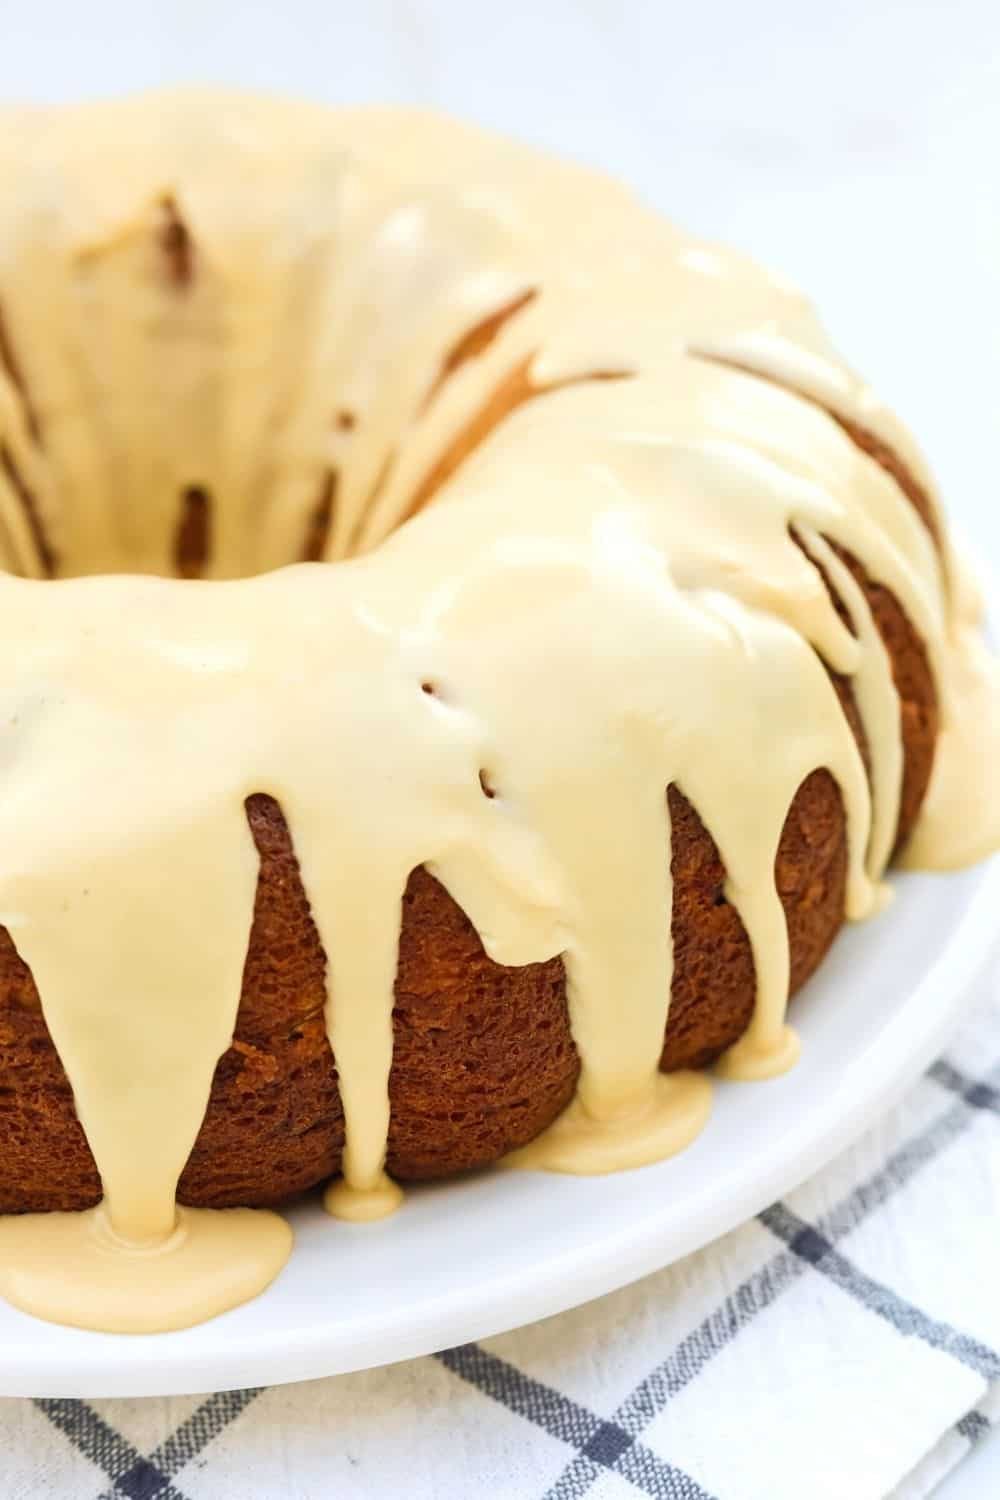 side view of a pear bundt cake made with a cake mix, on a white serving platter. The bundt cake is drizzled with a brown sugar icing.